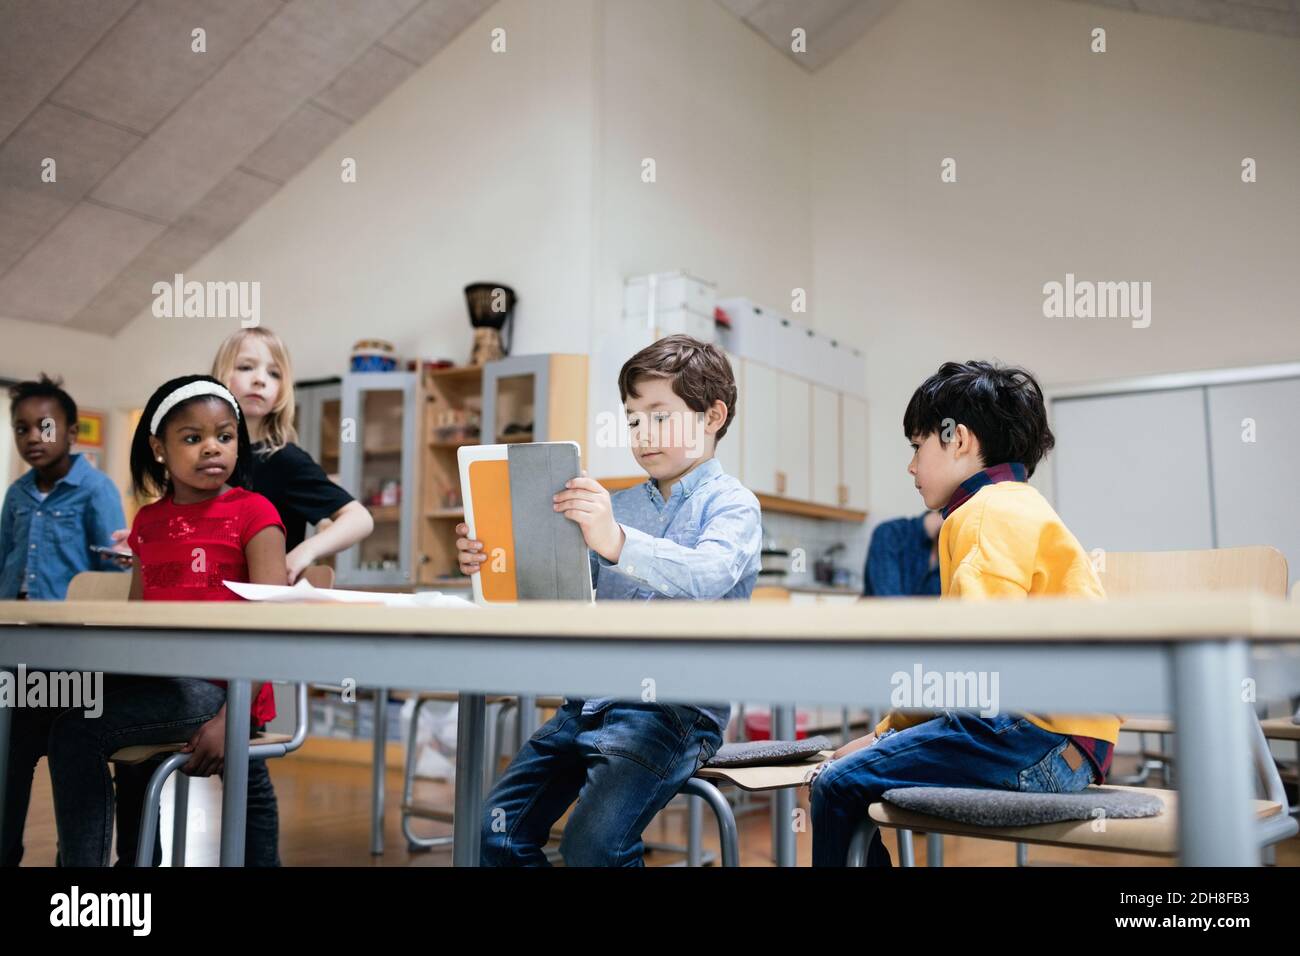 Students looking at boy using digital tablet in classroom at school Stock Photo